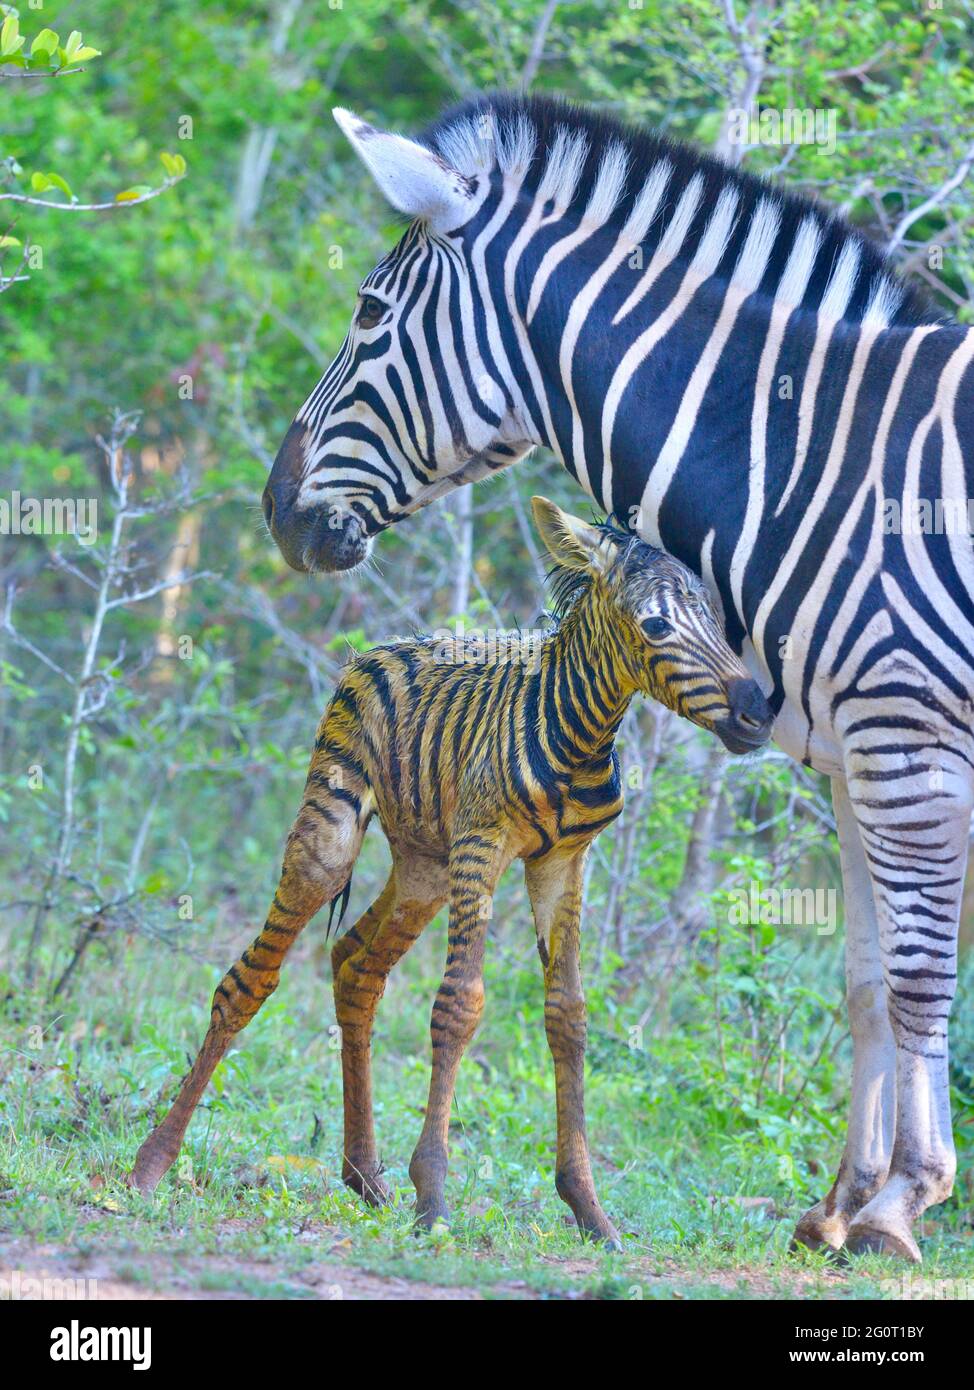 Natural life in Africa. Newborn baby zebra foal still wet and shiny. With mom. Stock Photo